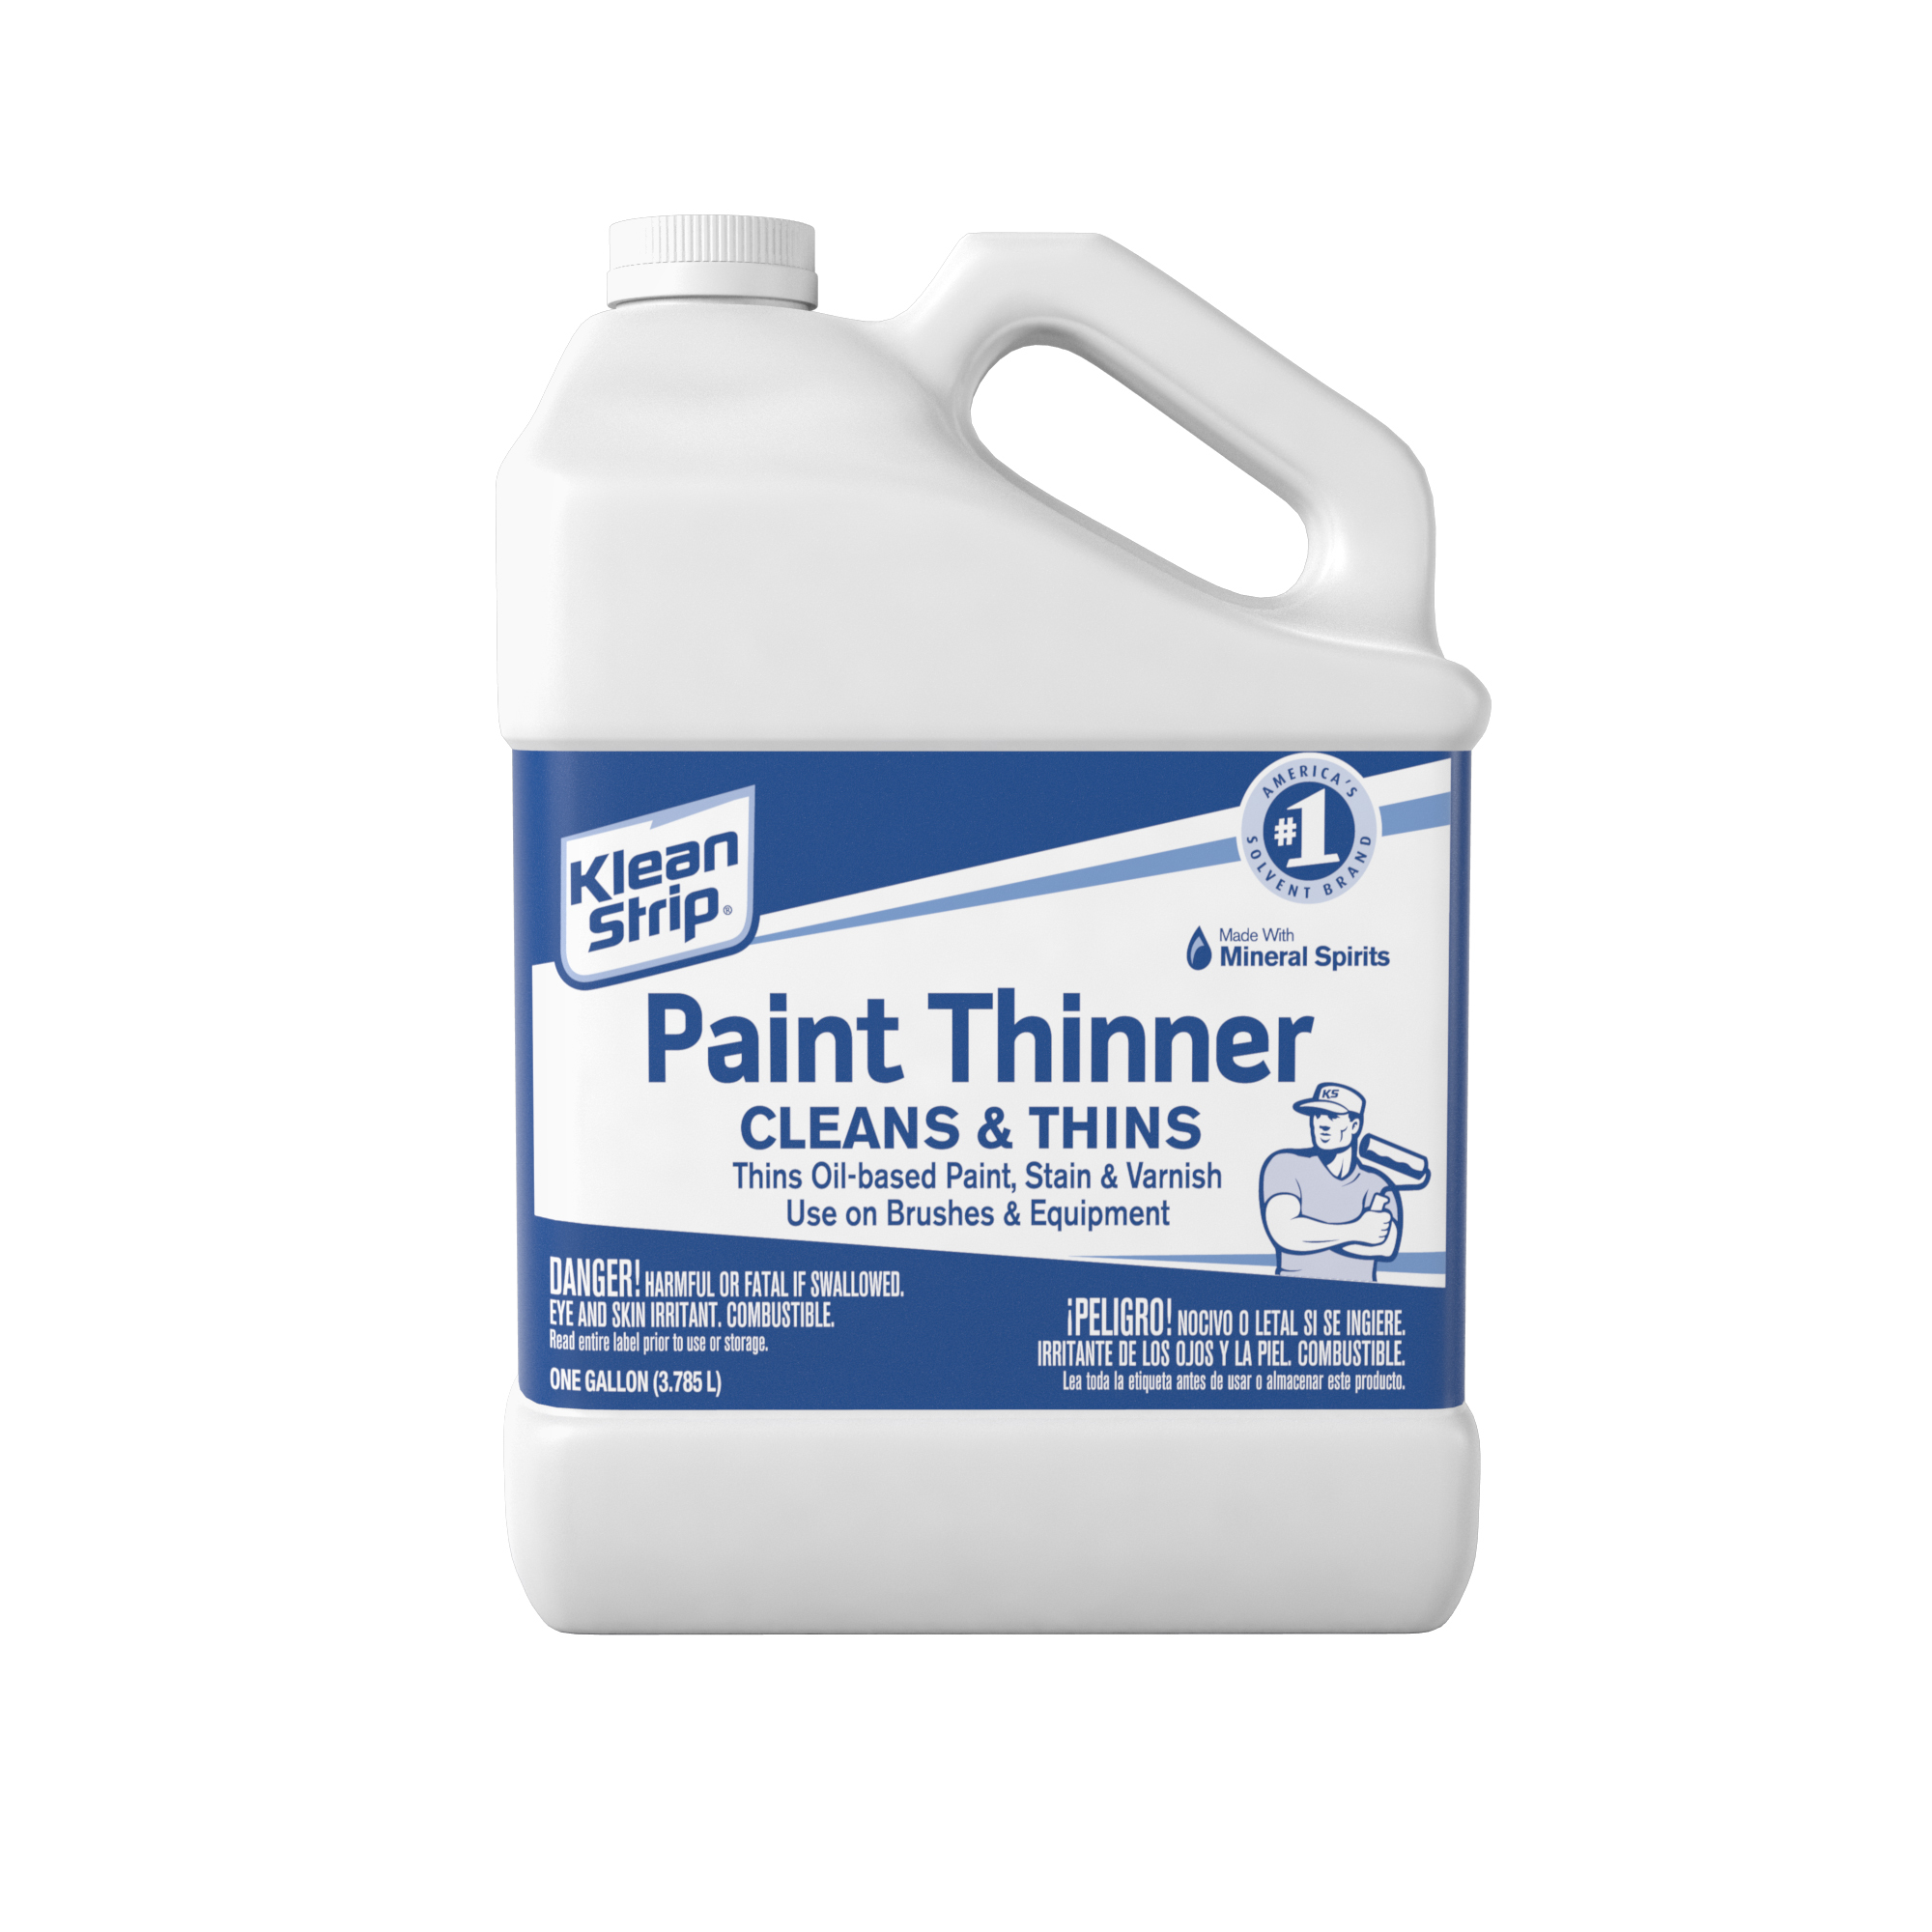 Paint Premier And Thinner